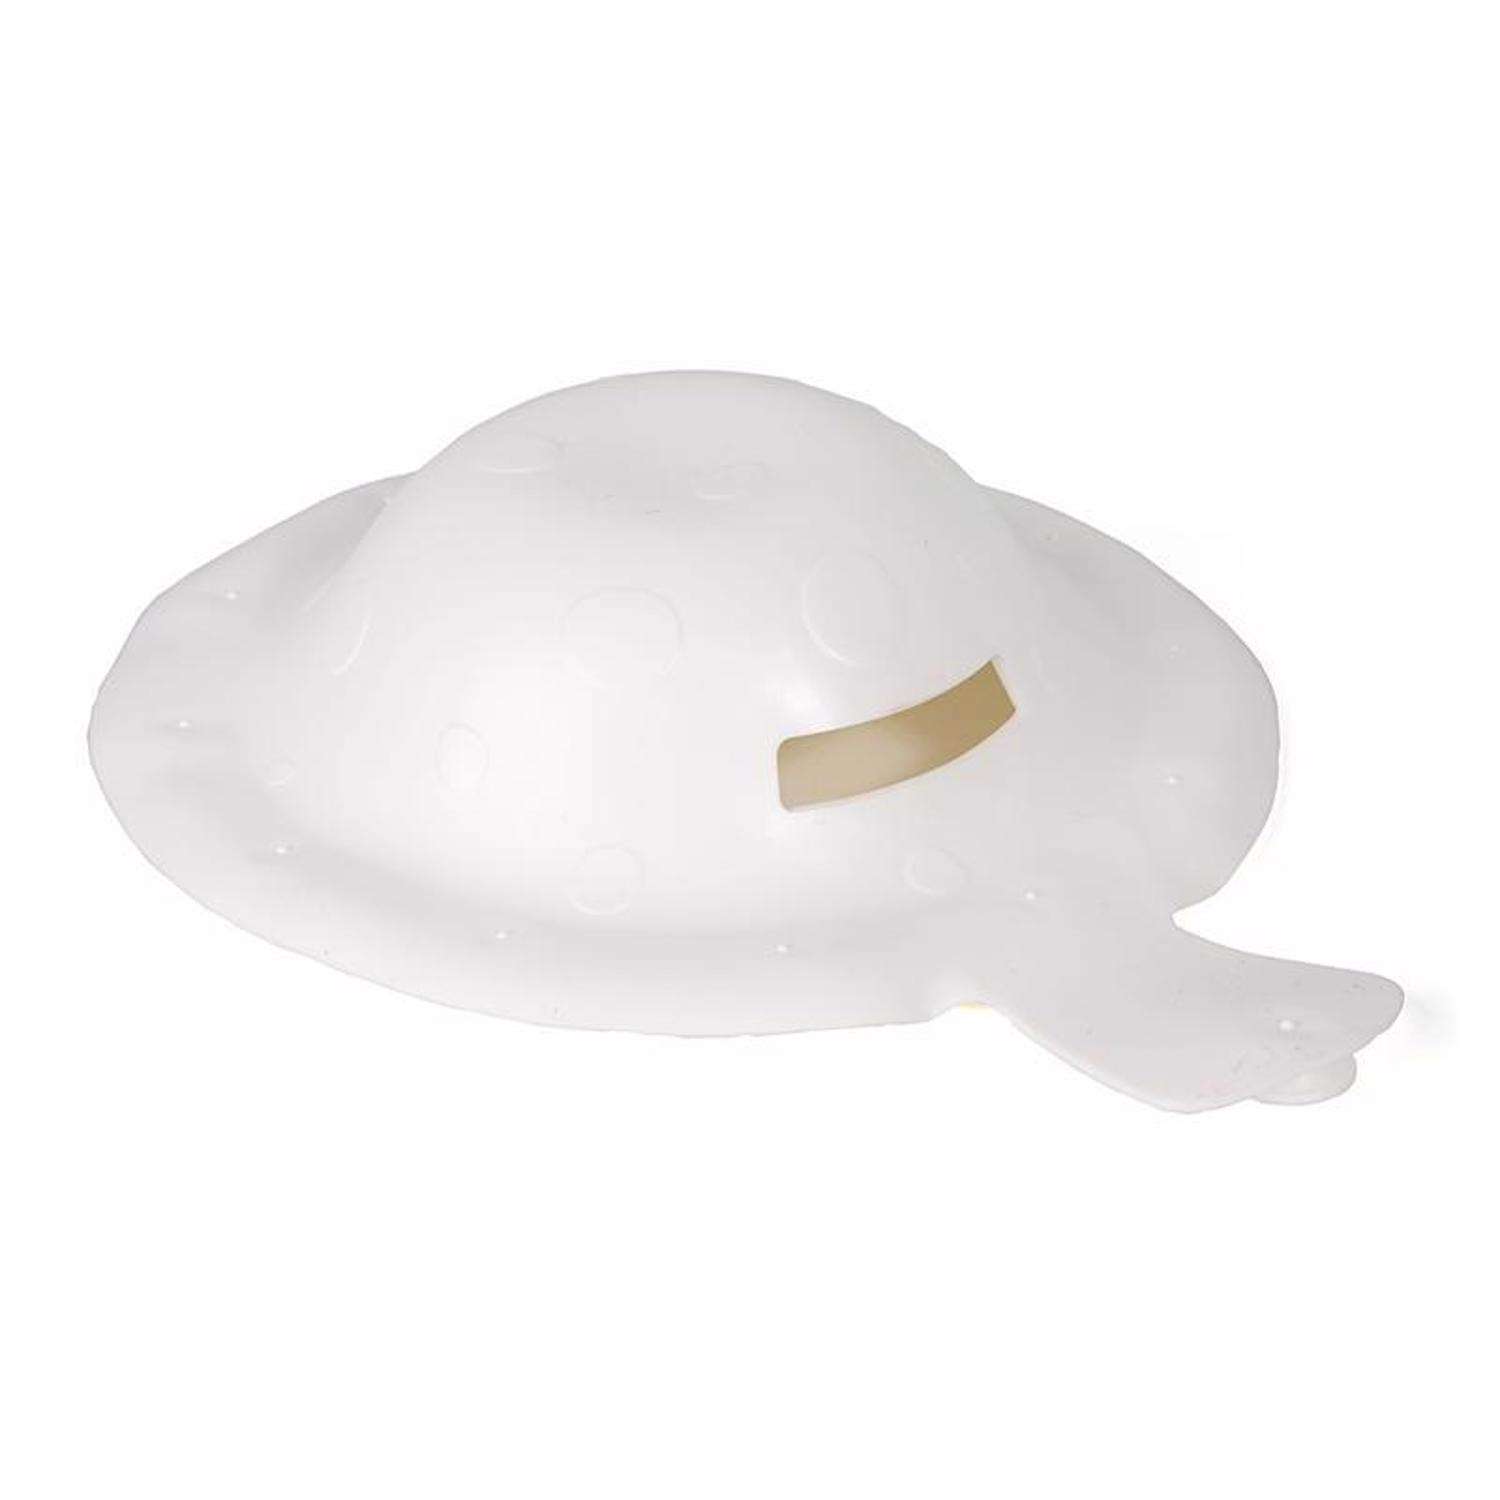 TubShroom Matte Silicone Hair Catcher - Ace Hardware